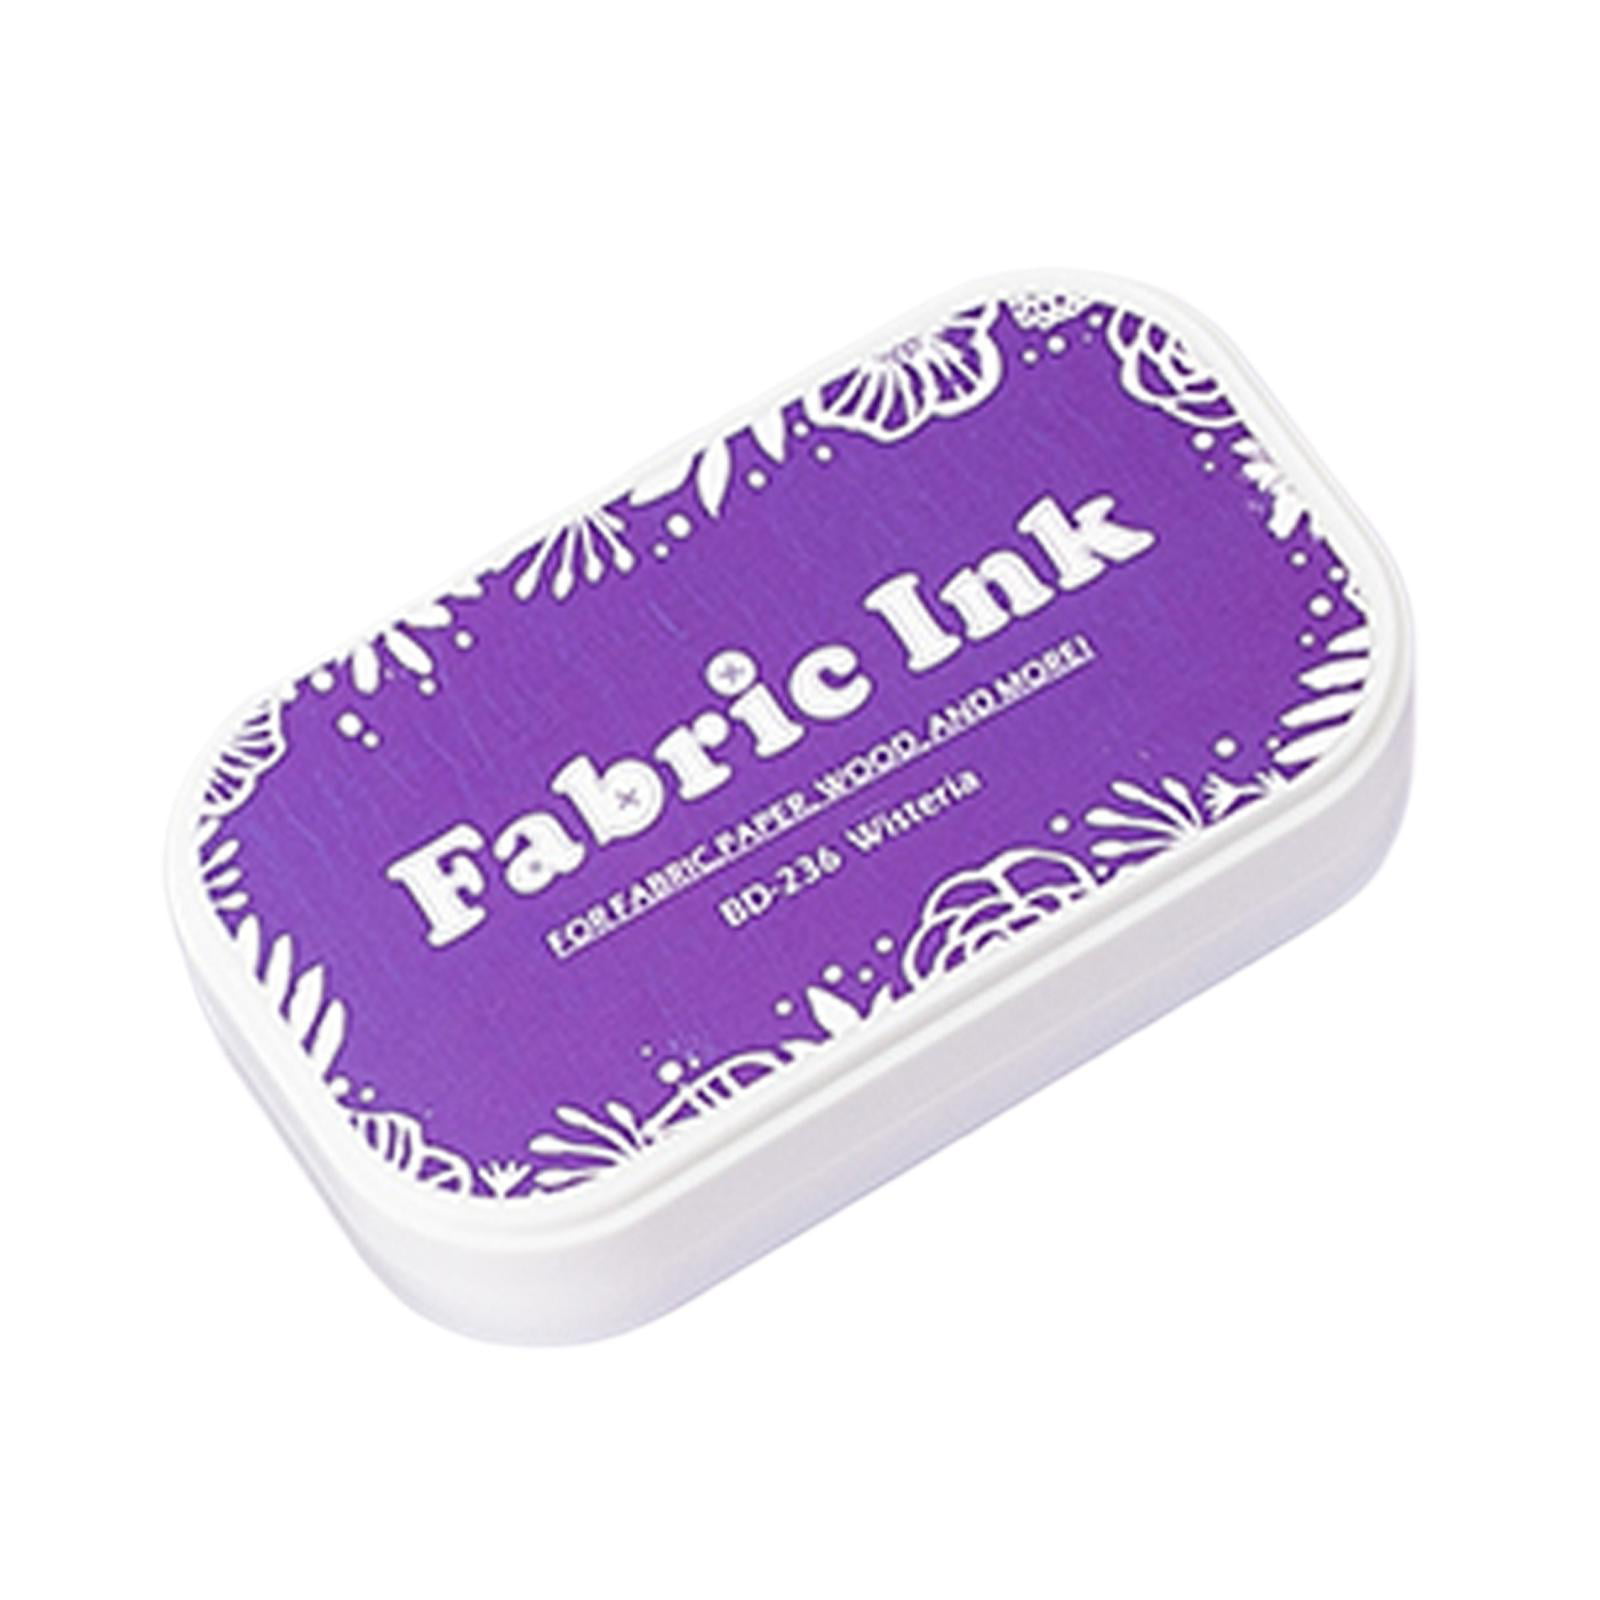 Fabric Ink Pads for Rubber Stamps, Washable Craft Ink Pads for Card Making Scrapbook, Permanent Ink Pad for Wood, Paper, 3.7 x 2.1 (Violet, 216)